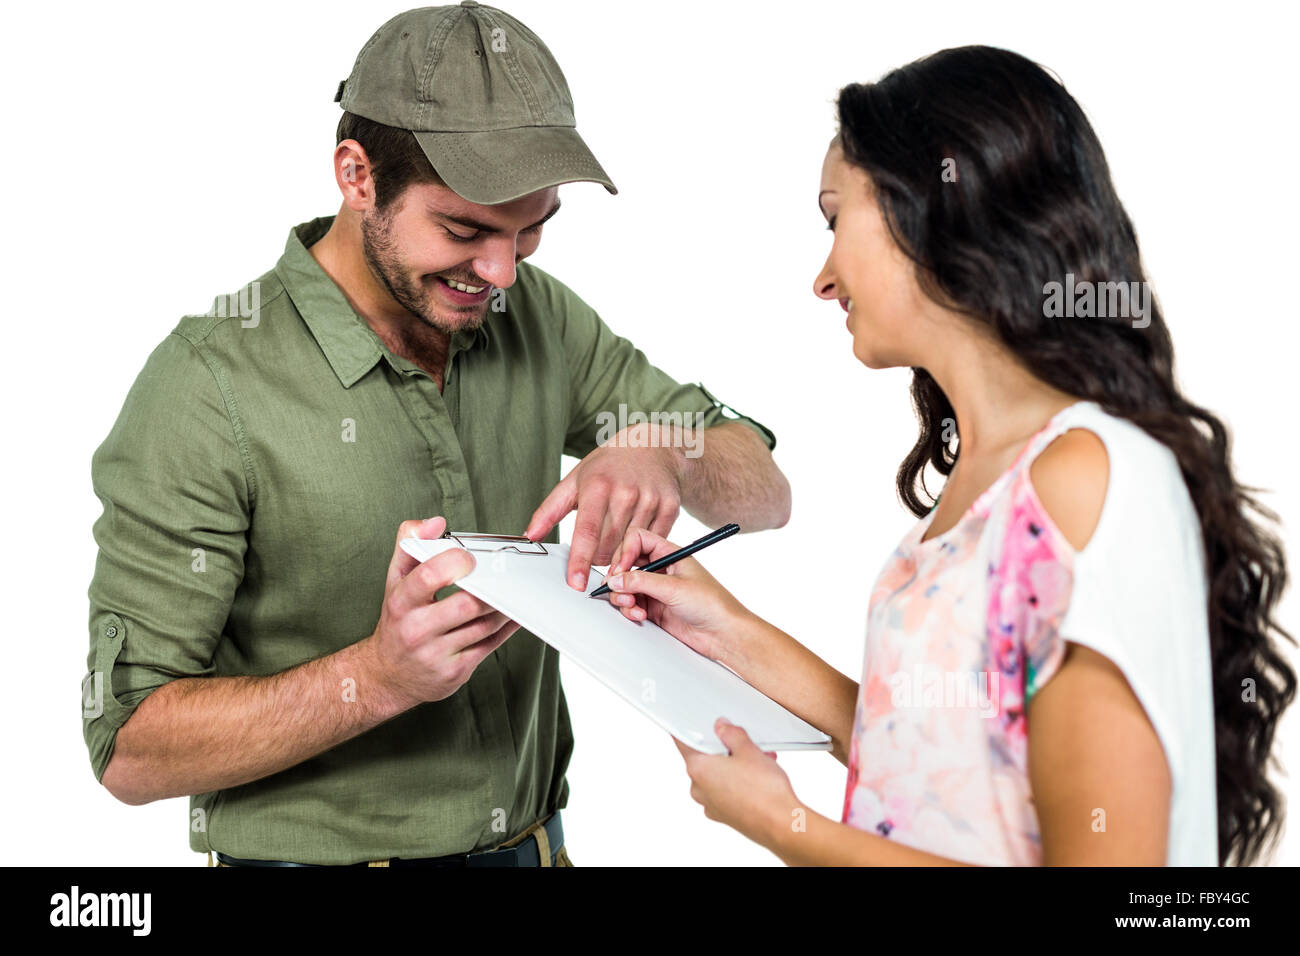 Woman signing for pack delivery with smiling postman Stock Photo